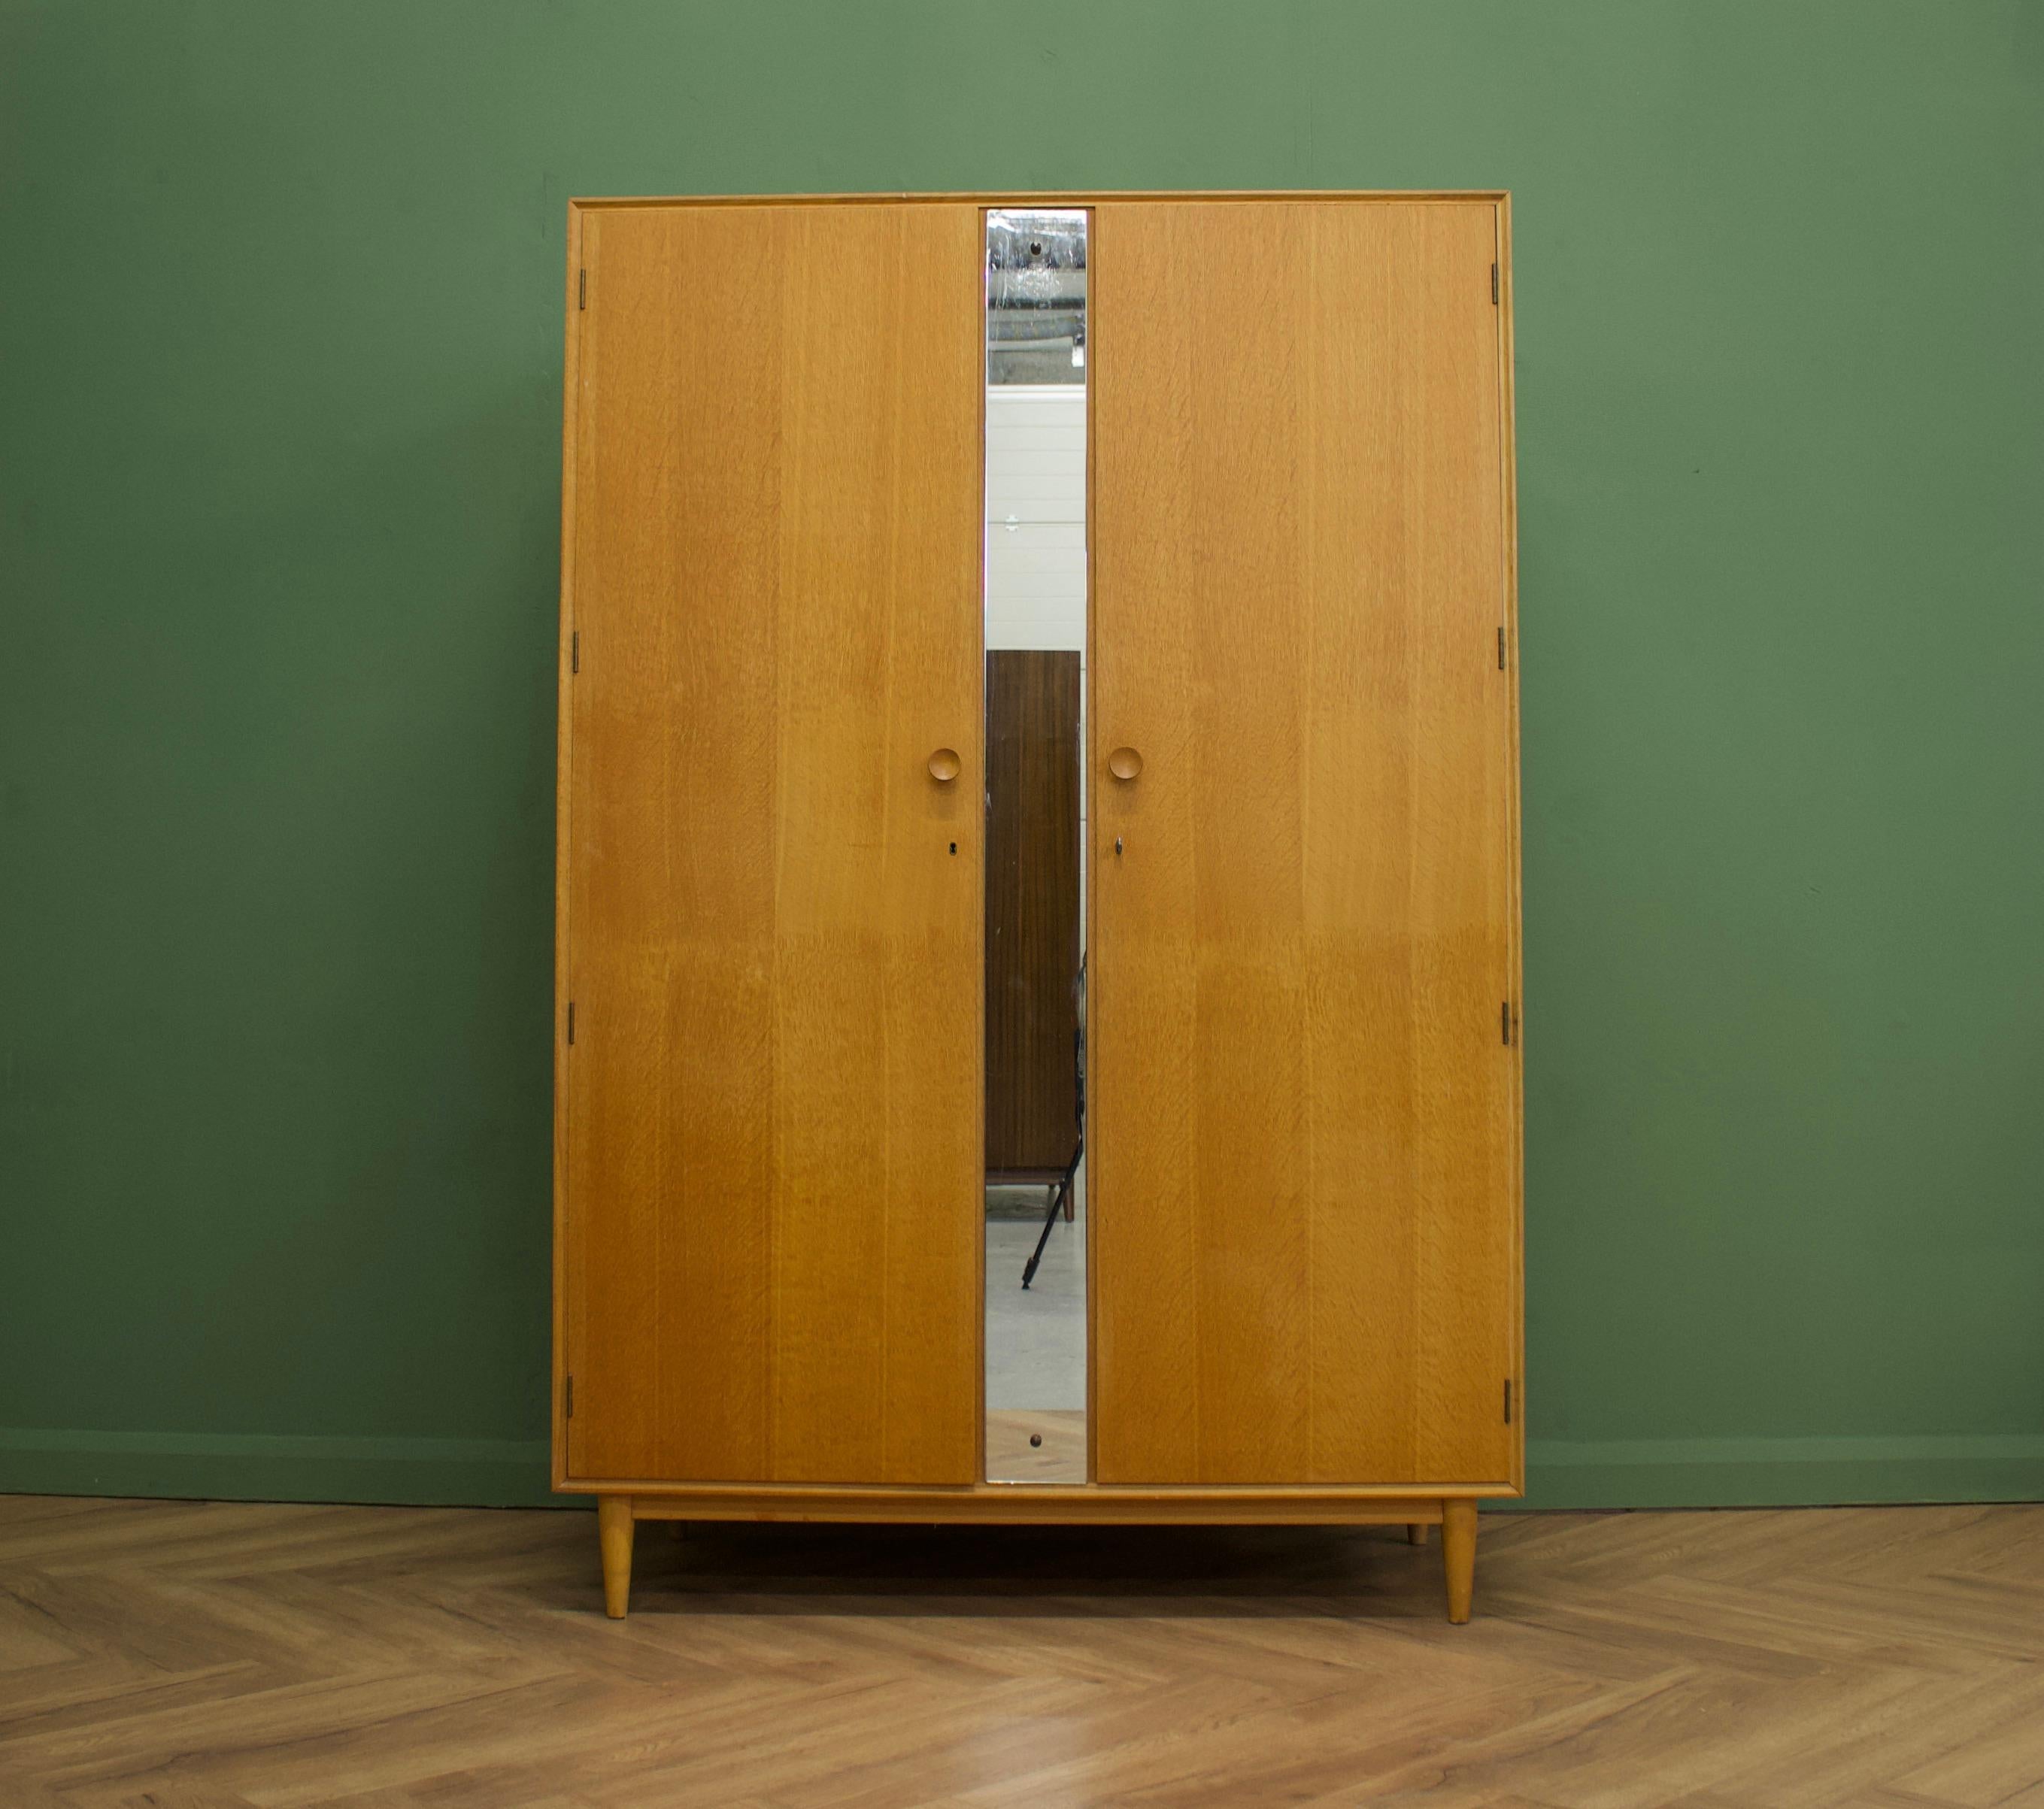 Midcentury wardrobe
Manufactured in the UK by Meredew
Made from oak and oak veneer.

Featuring solid oak handles, a rail and full length mirror.